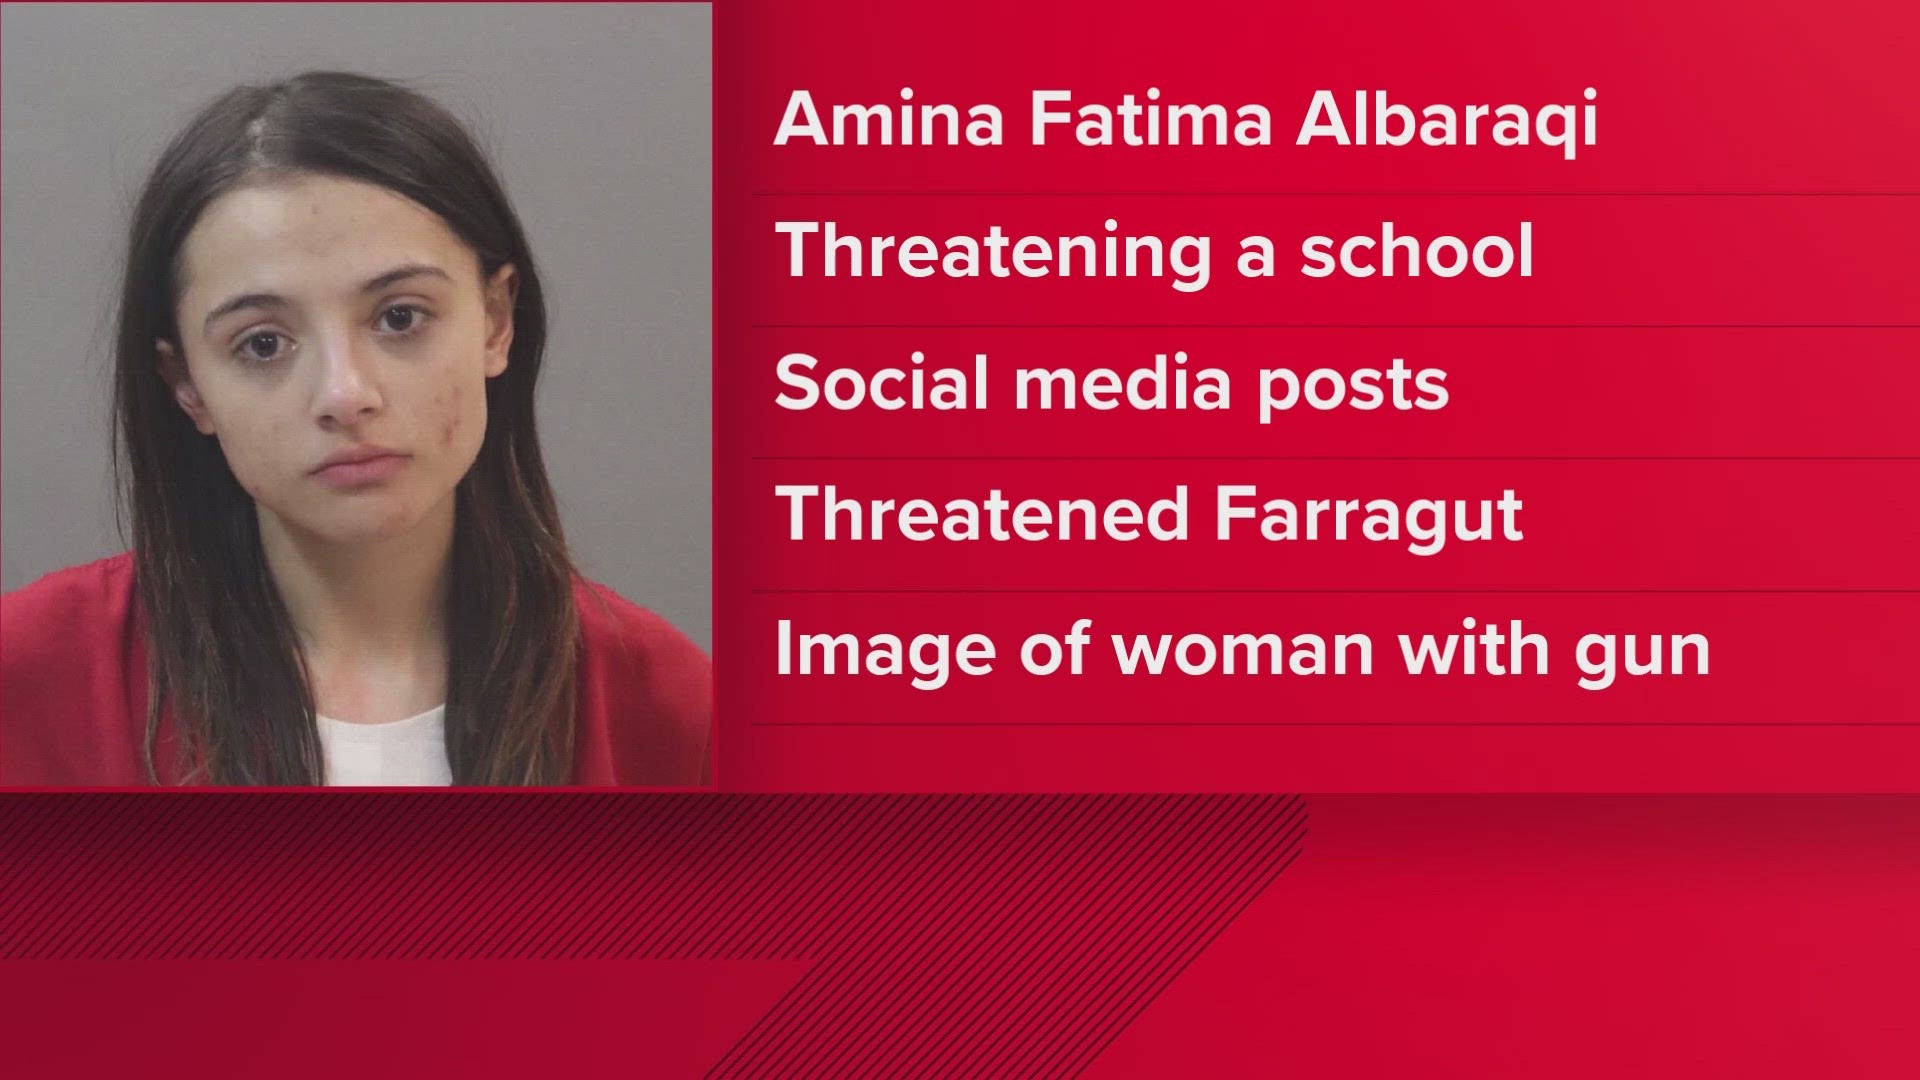 The social media post said, "Shoot up Farragut, shoot up the school" and included an image of a female holding a gun, KCSO said.